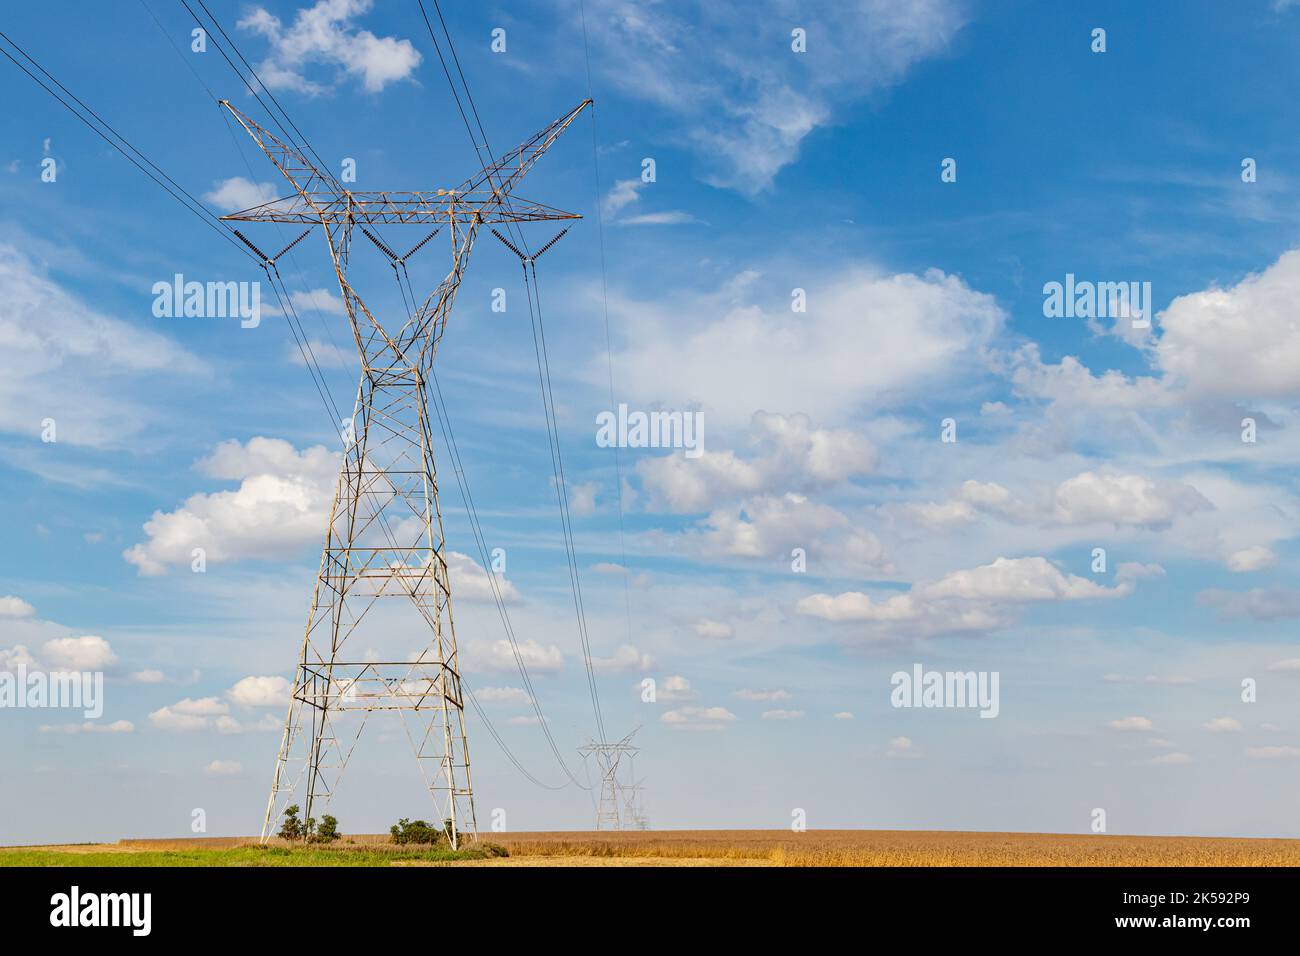 Electricity transmission towers in rural farm field. Electrical power grid and distribution safety, security and maintenance concept Stock Photo